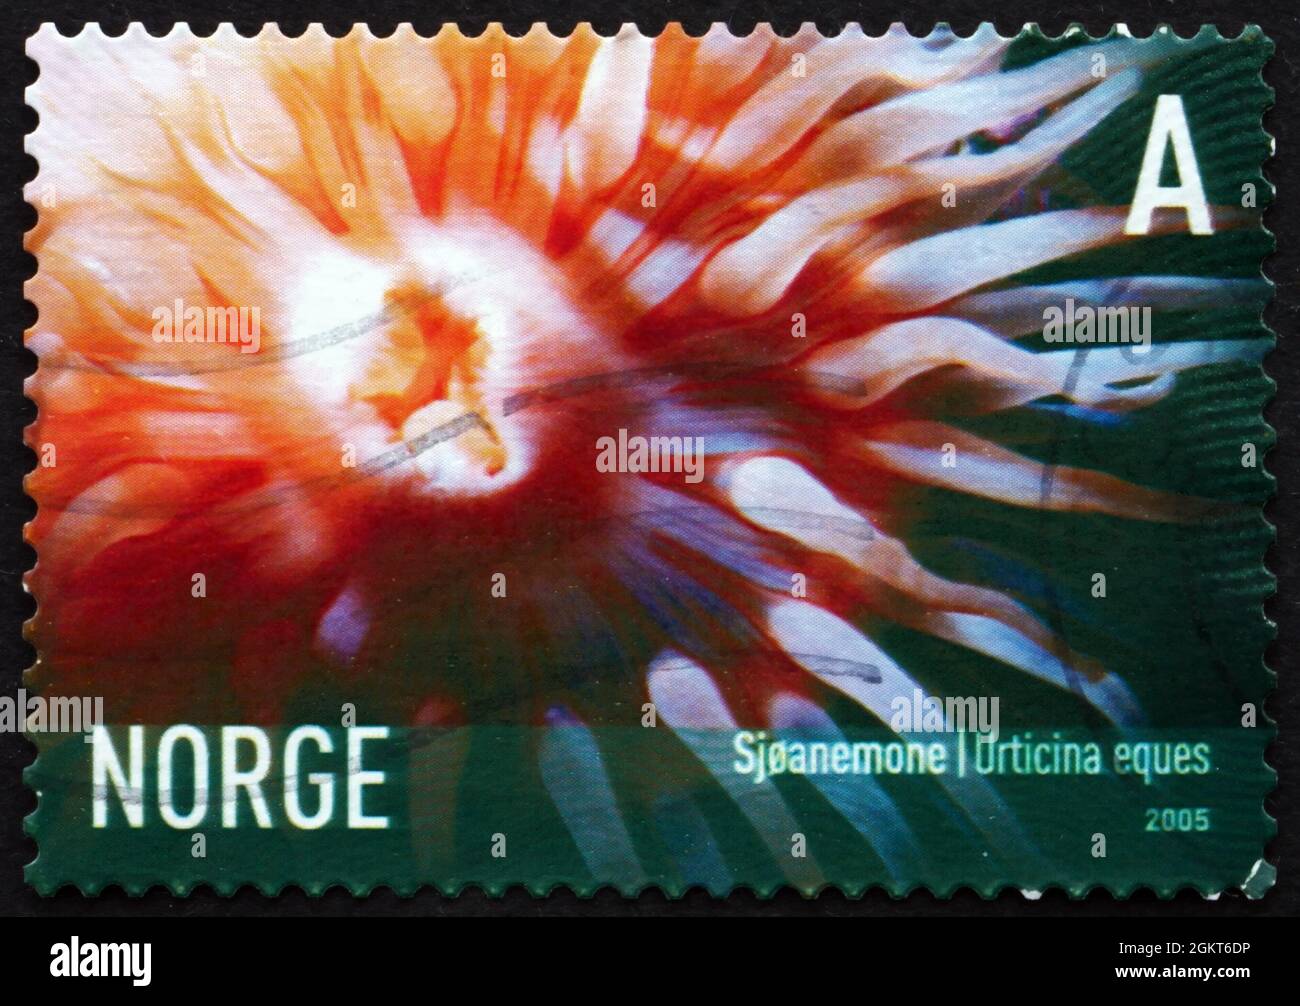 NORWAY - CIRCA 2005: a stamp printed in the Norway shows Strawberry Anemone, Urticina Eques, Marine Life, circa 2005 Stock Photo